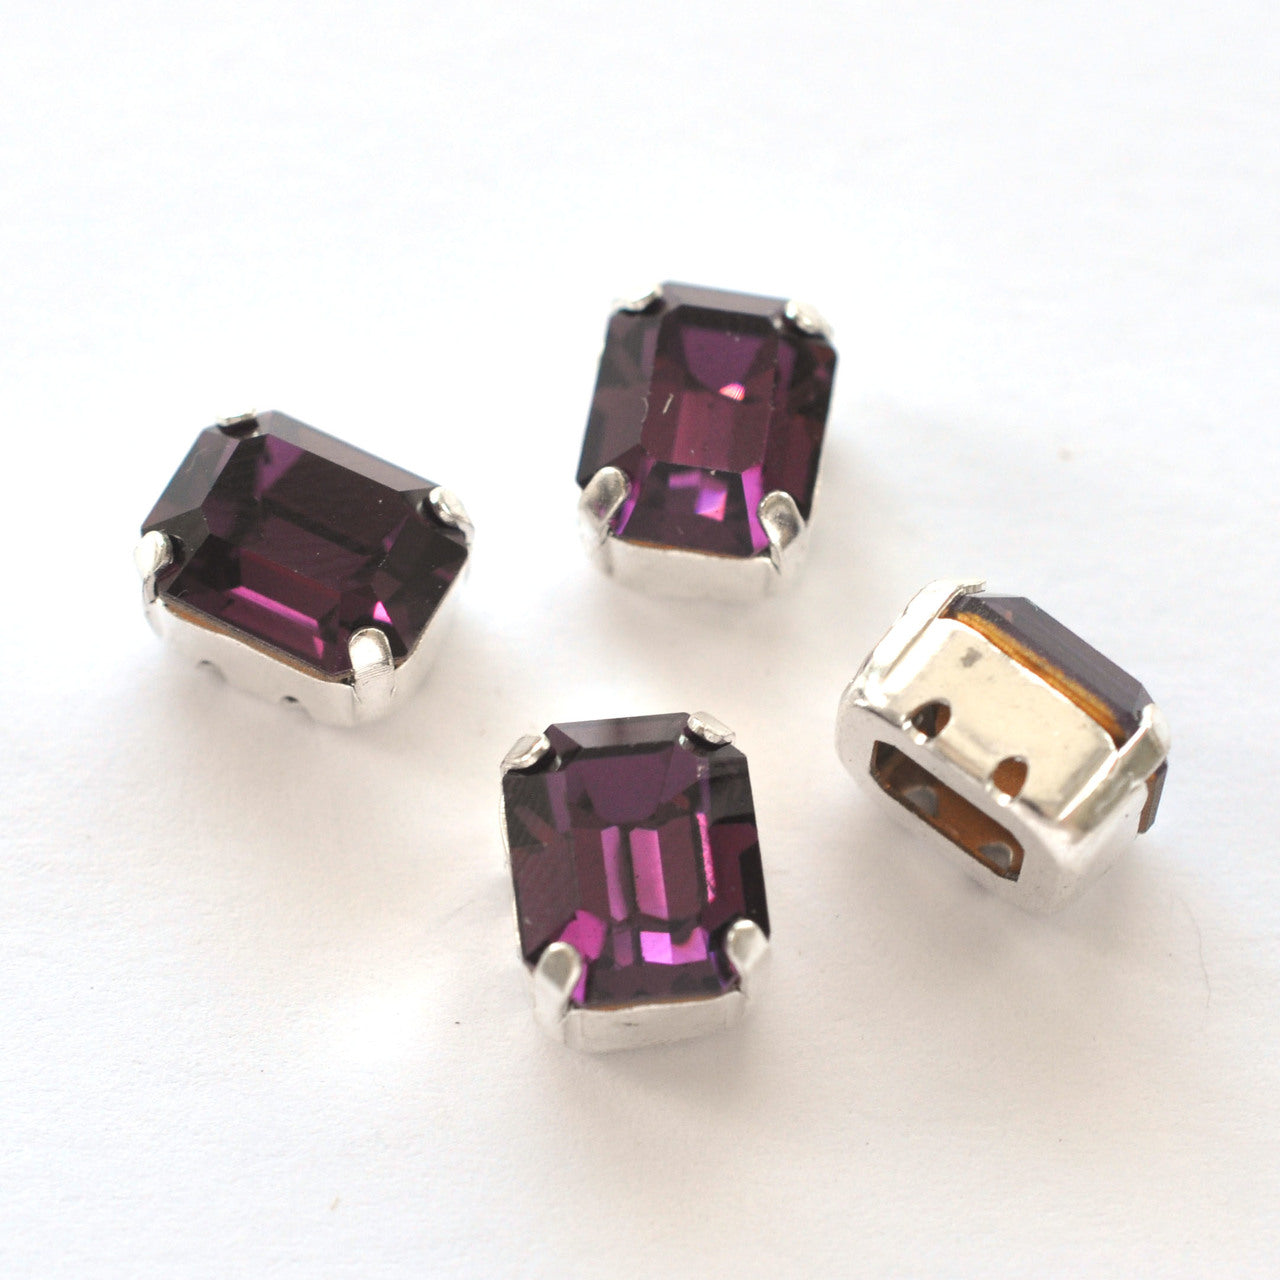 Amethyst 10x8mm Octagon Sew On Crystals - 4 Pieces